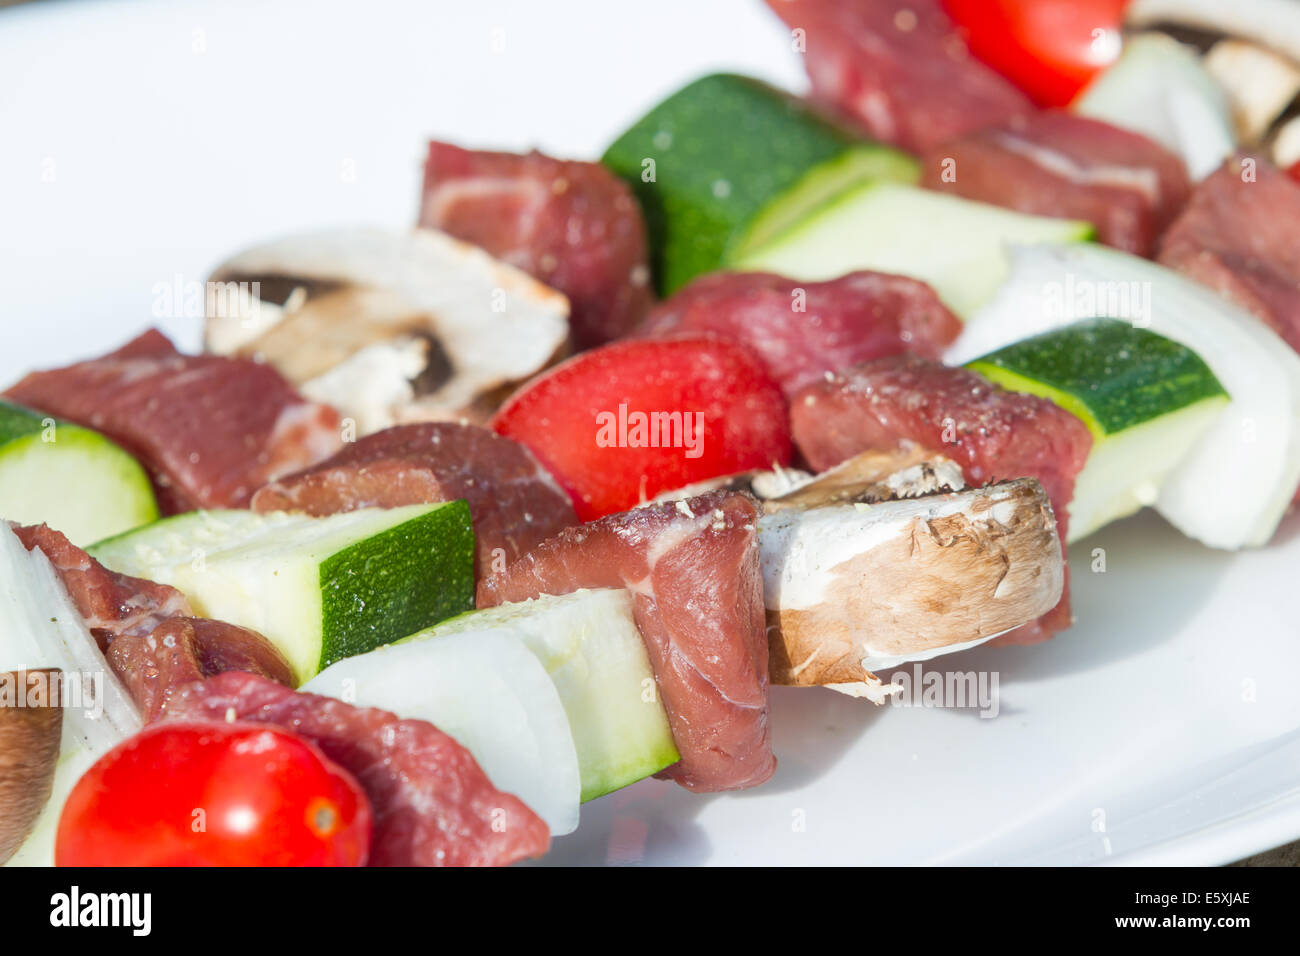 meat skewers on a plate with seasonings for an outdoor meal Stock Photo